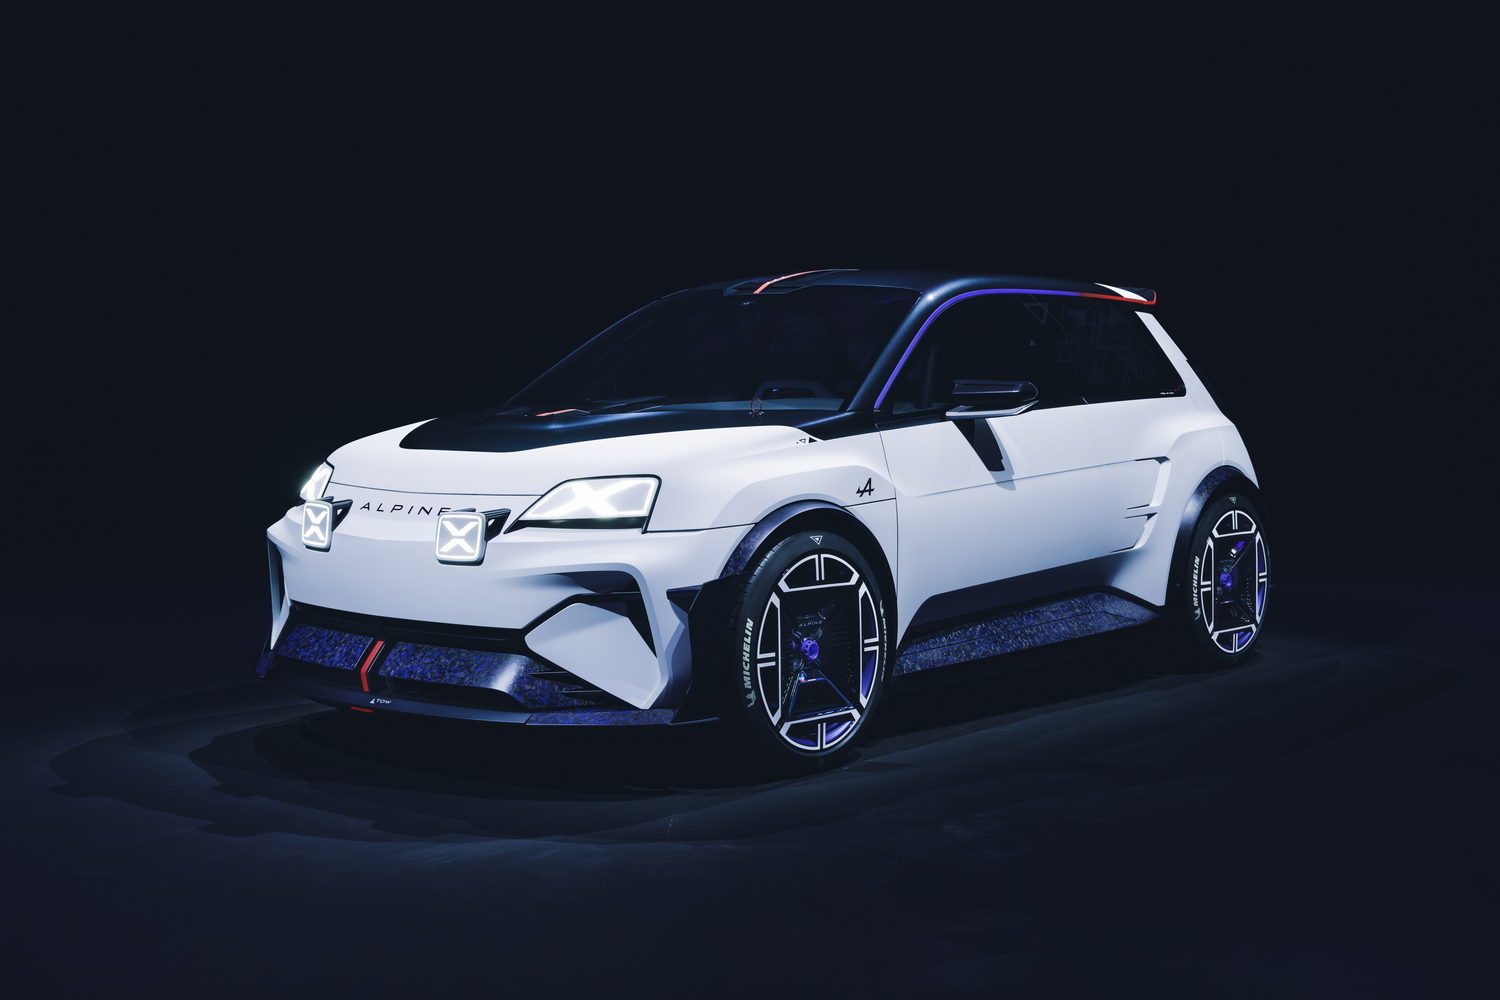 Alpine’s upcoming electric hot hatch previewed by A290_B. Image by Alpine.